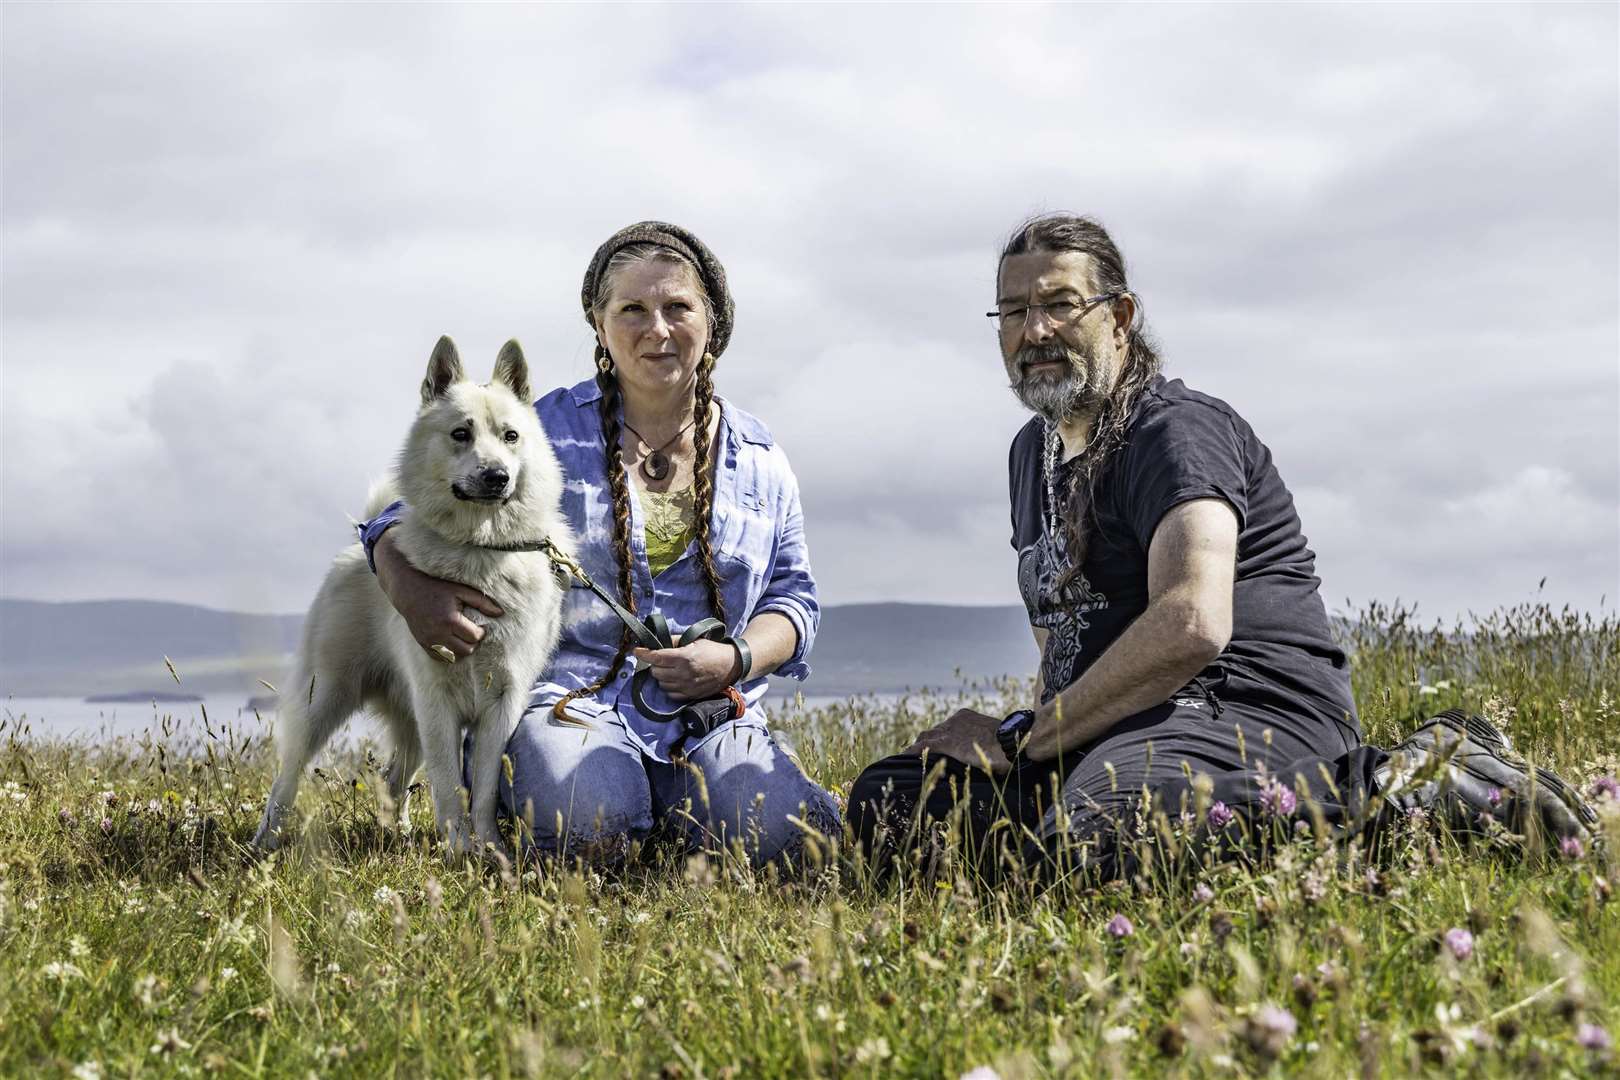 Helen Hart and partner Jason have left behing their stressful lives in Kent to run a business on a Shetland island. Photo: Renegade Pictures (UK) Ltd